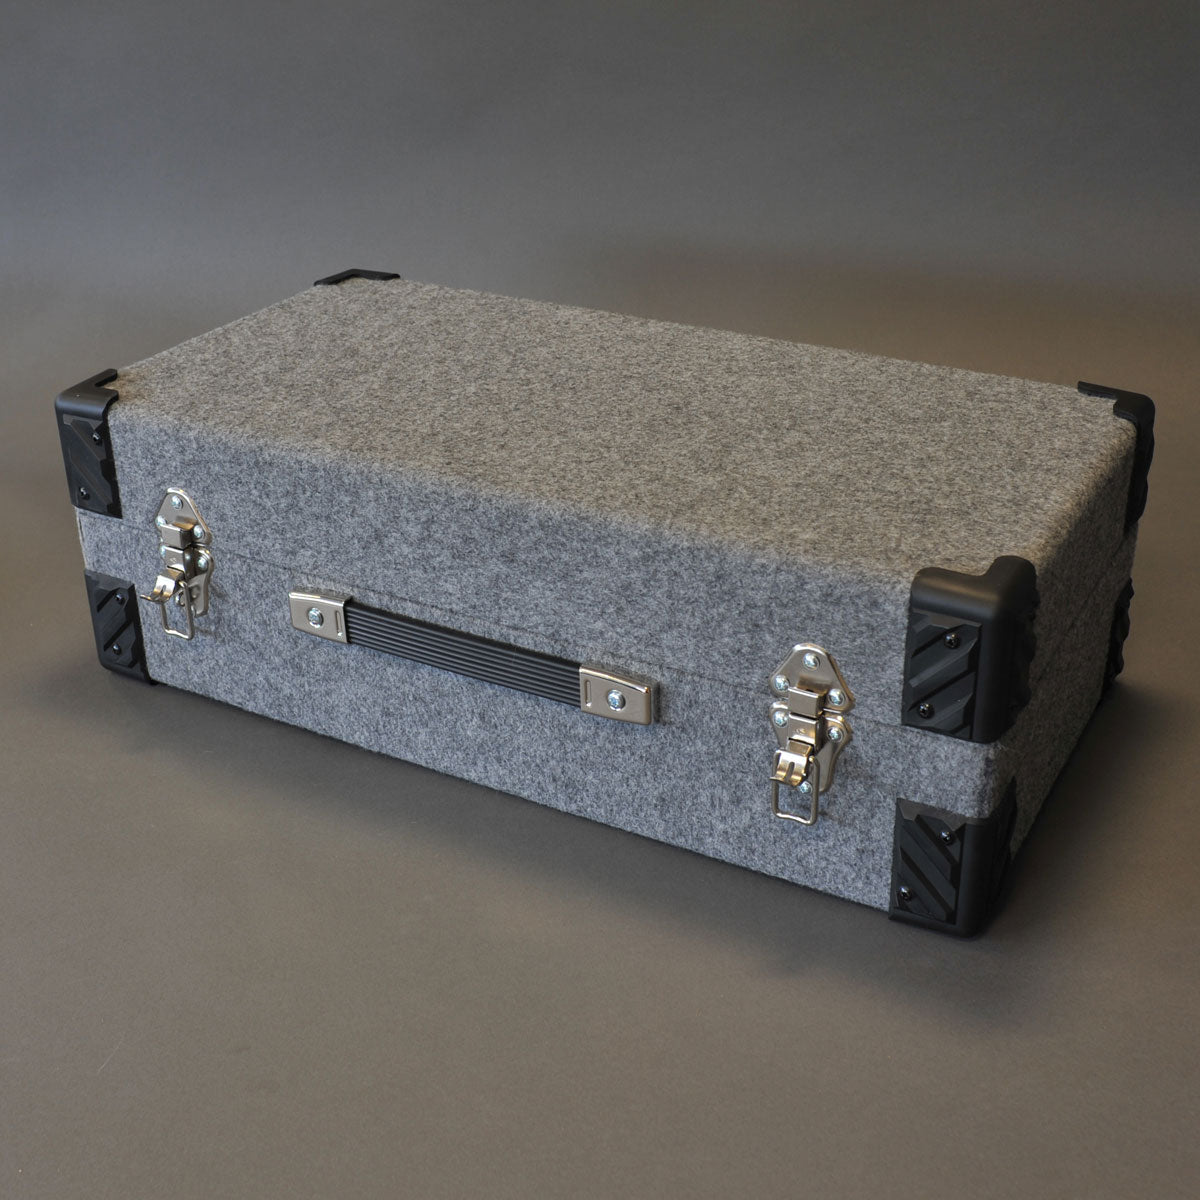 WOODEN TRUNK COVERED WITH BLACK FABRIC FOR 300 RECORD 45 RPM 7 INCHES